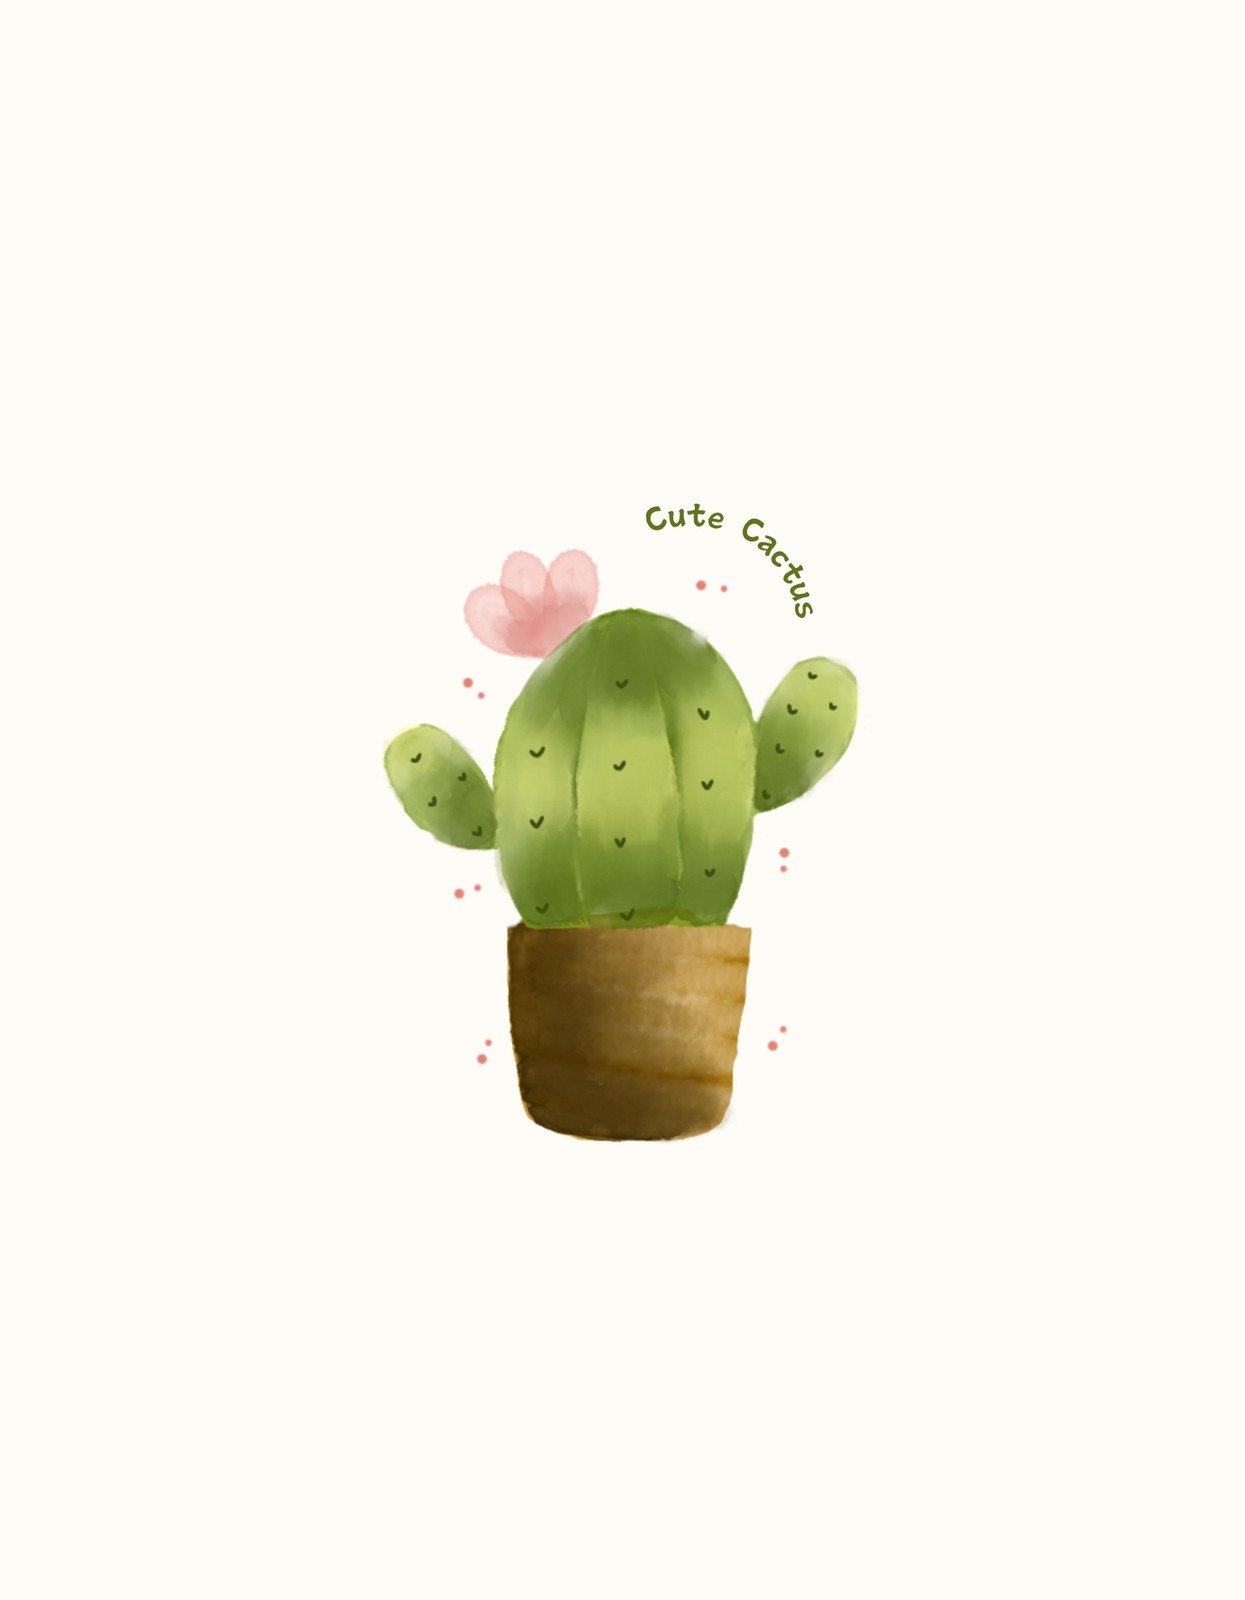 Plant Cartoon Images Wallpapers